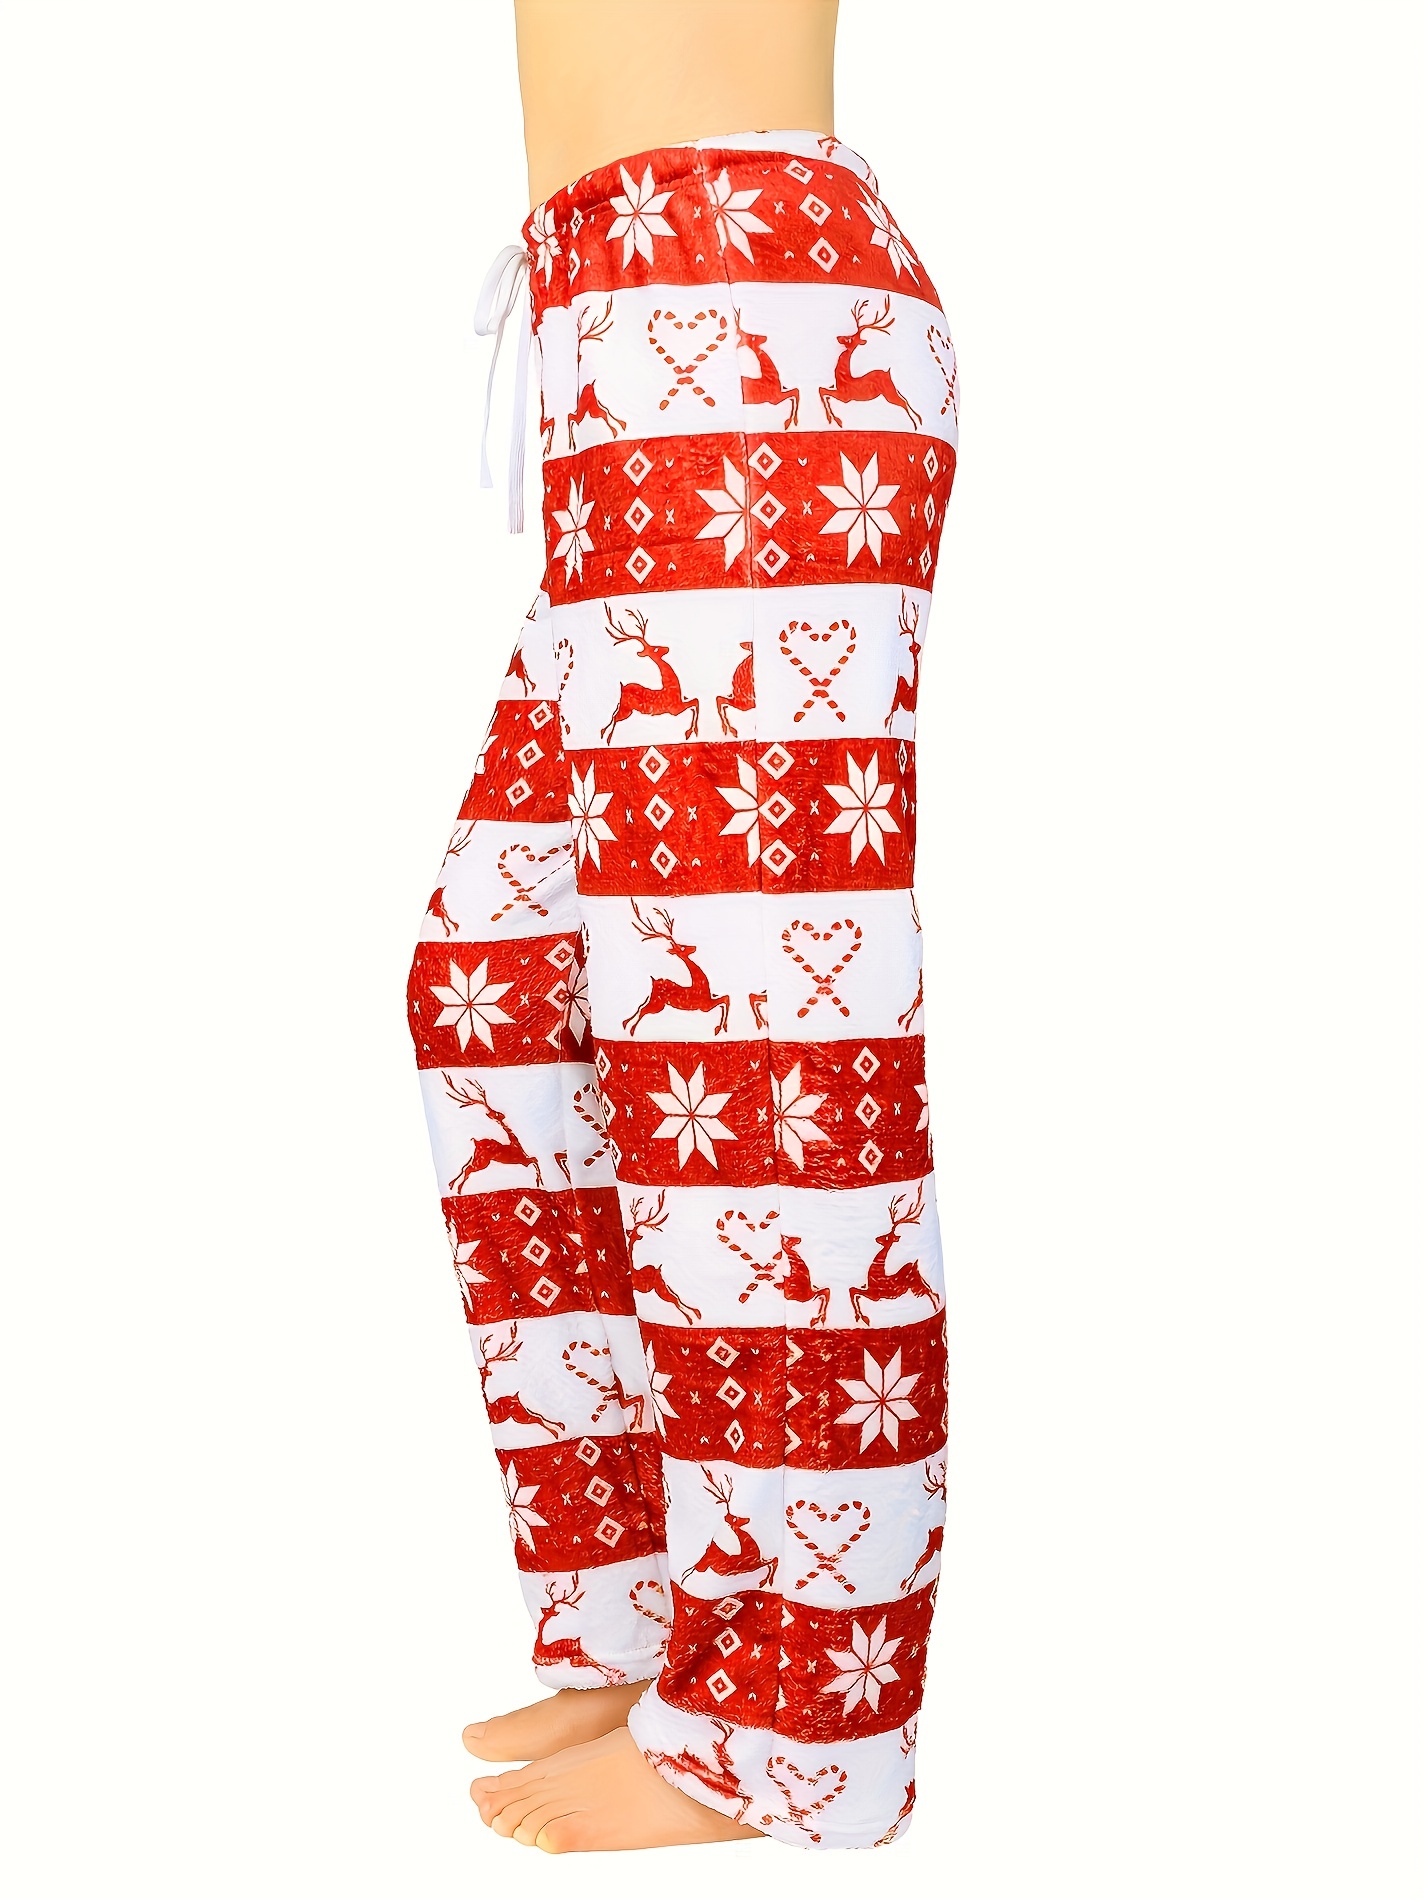  Xmas Pajamas For Women Plus Size Reindeer And Snowflake  Leggings Tights Ethnic Tribal Pants For Women 3XL